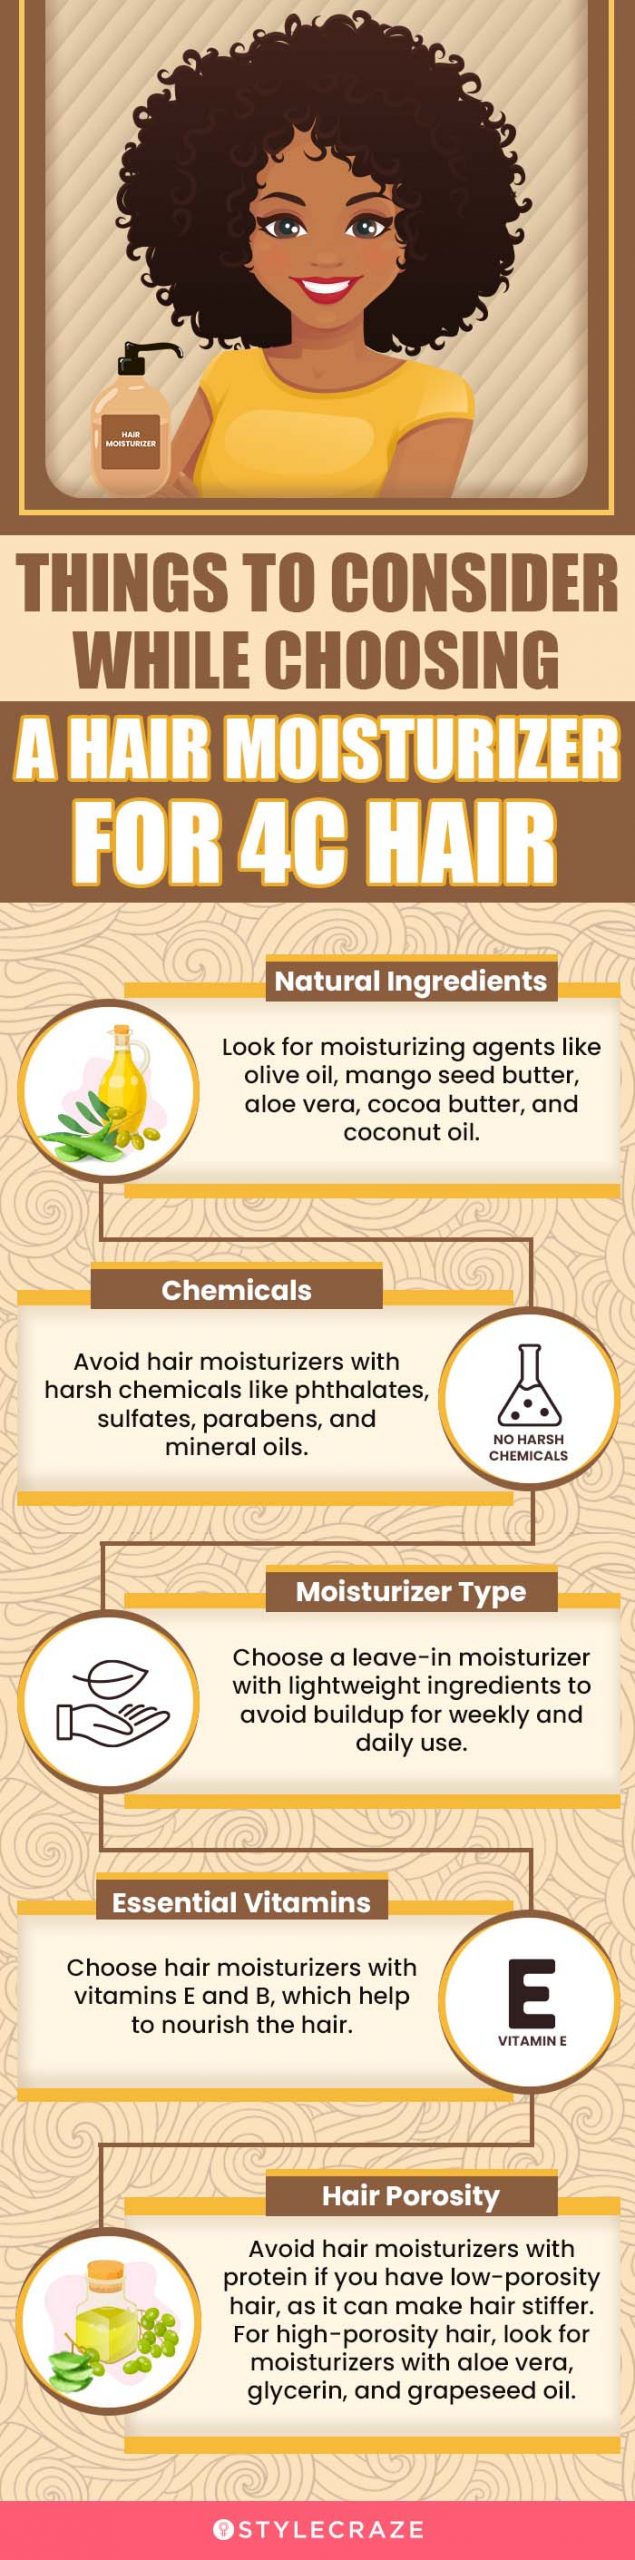 Things To Consider While Choosing A Hair Moisturizer For 4C Hair (infographic)